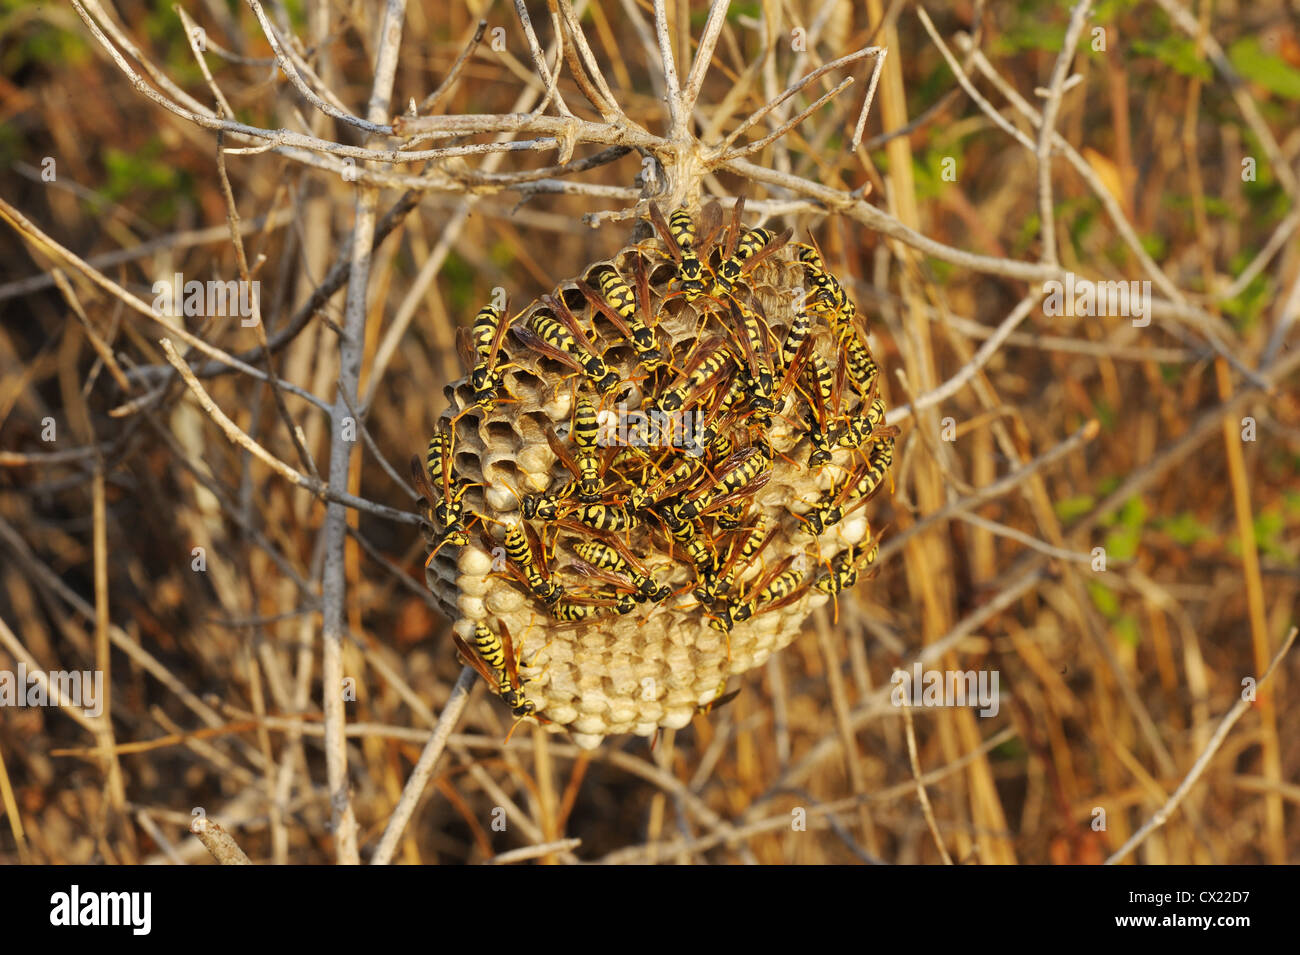 Wasps in the nest among the dry grass in Israel Stock Photo